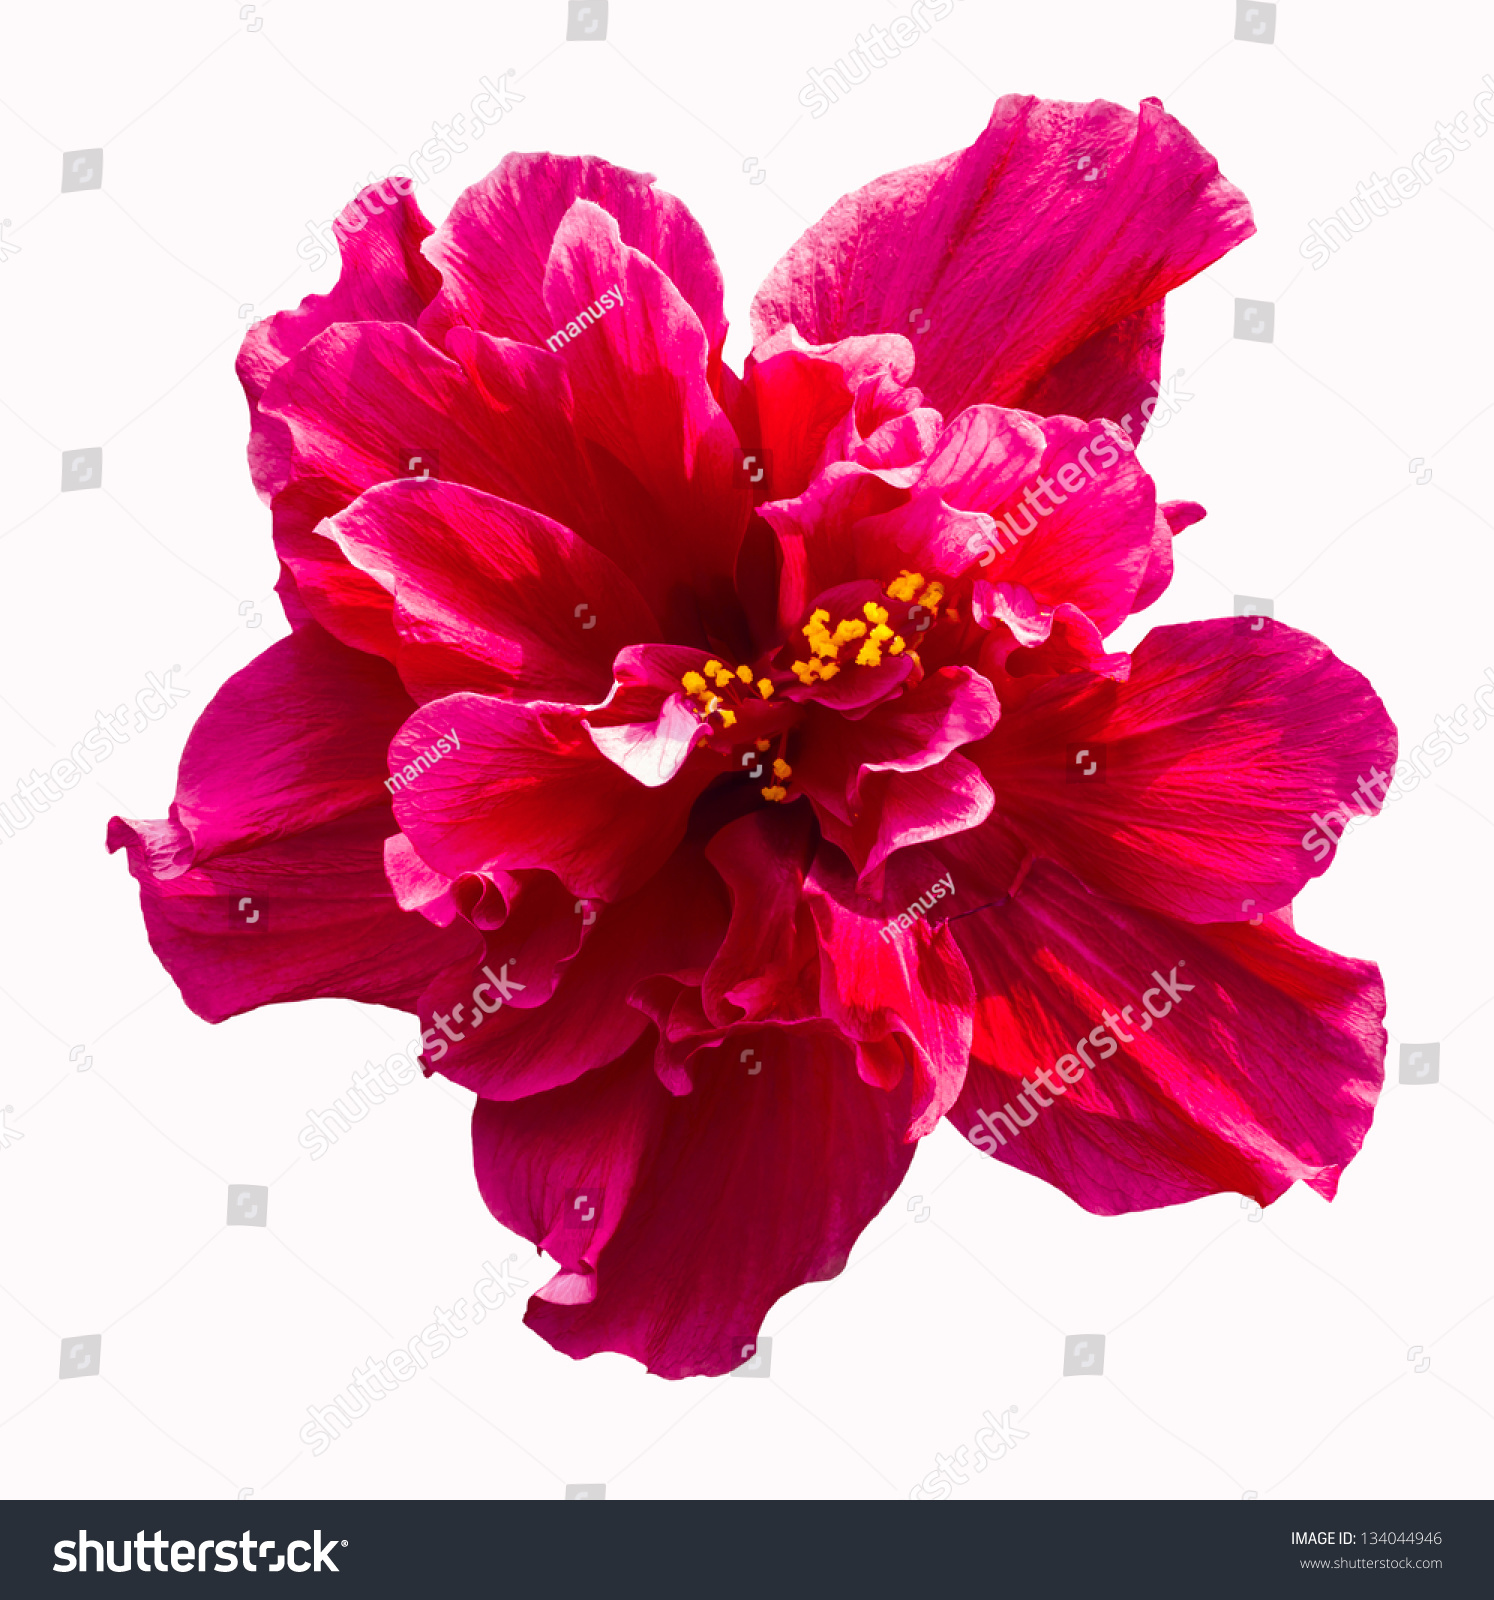 A big red hibiscus flower isolated on white background #134044946